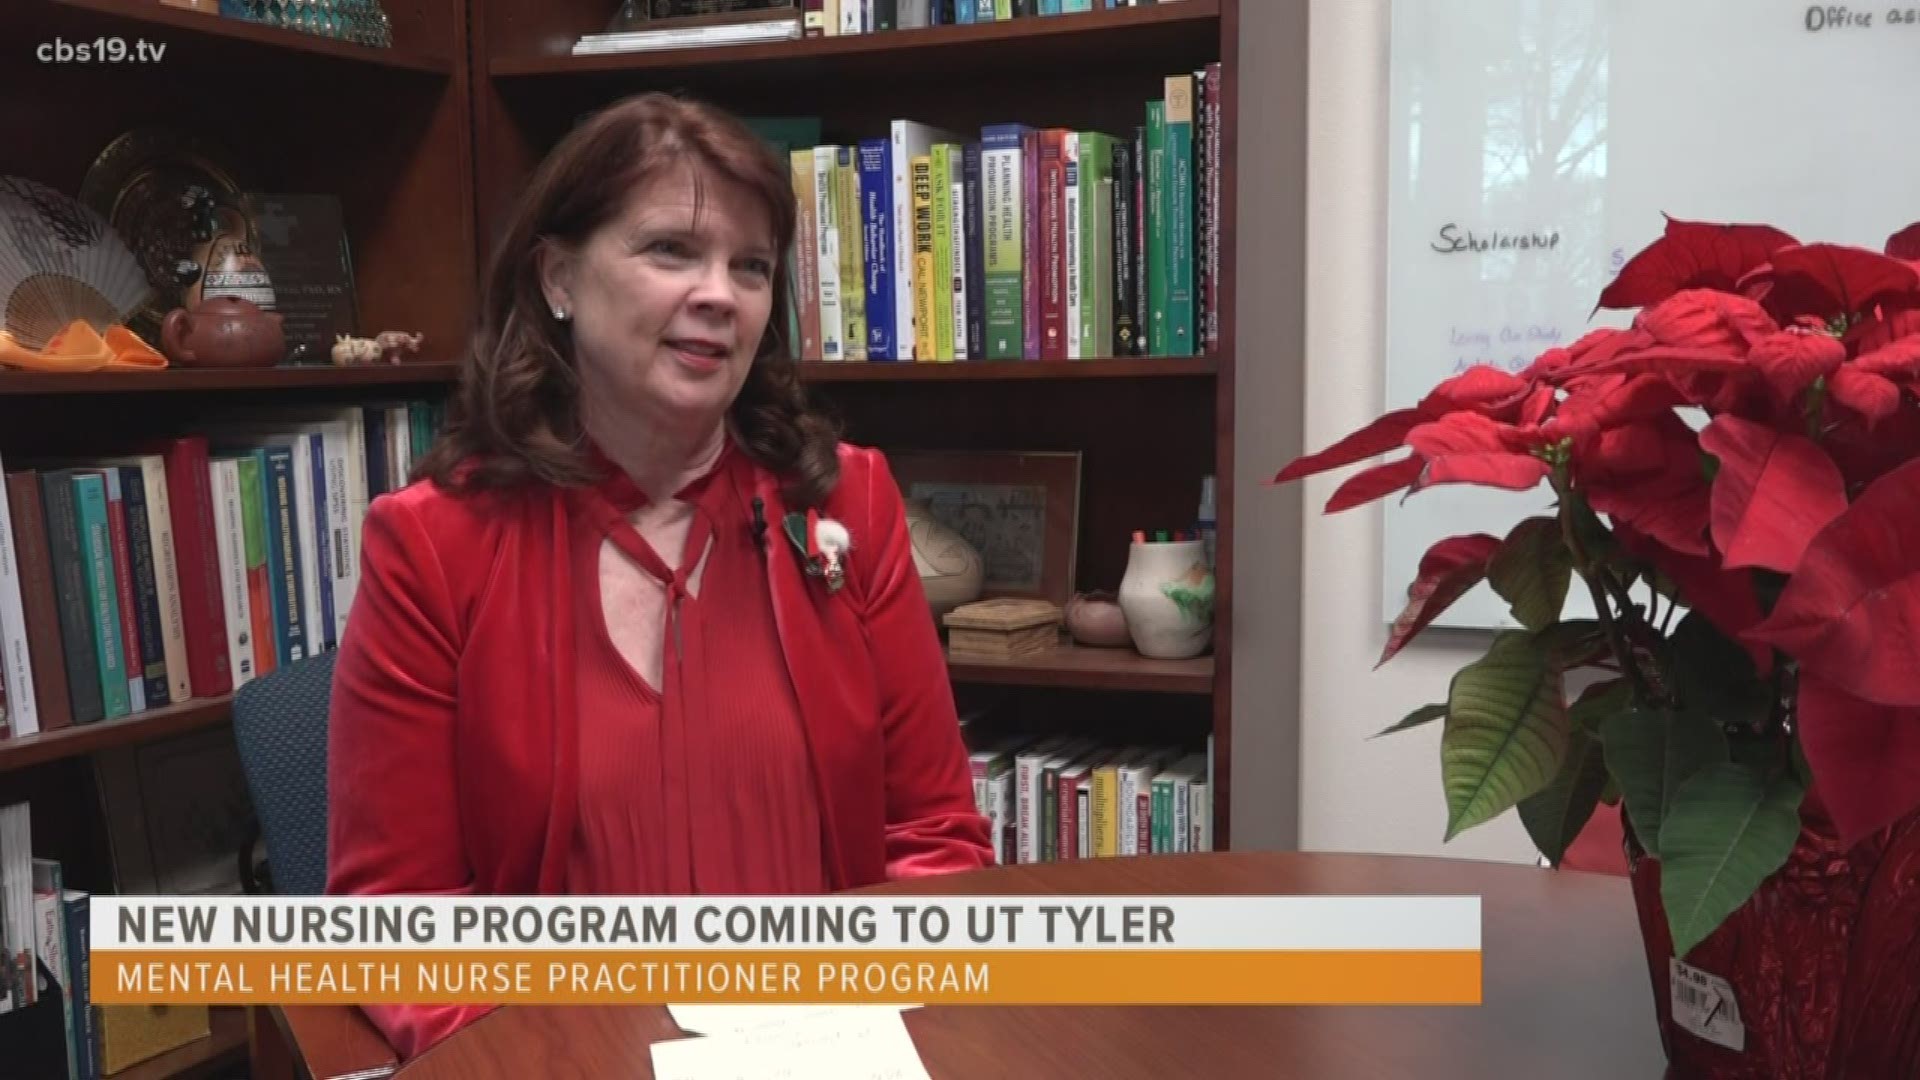 The University of Texas at Tyler is adding a Mental Health Care Practitioner Program in 2020.